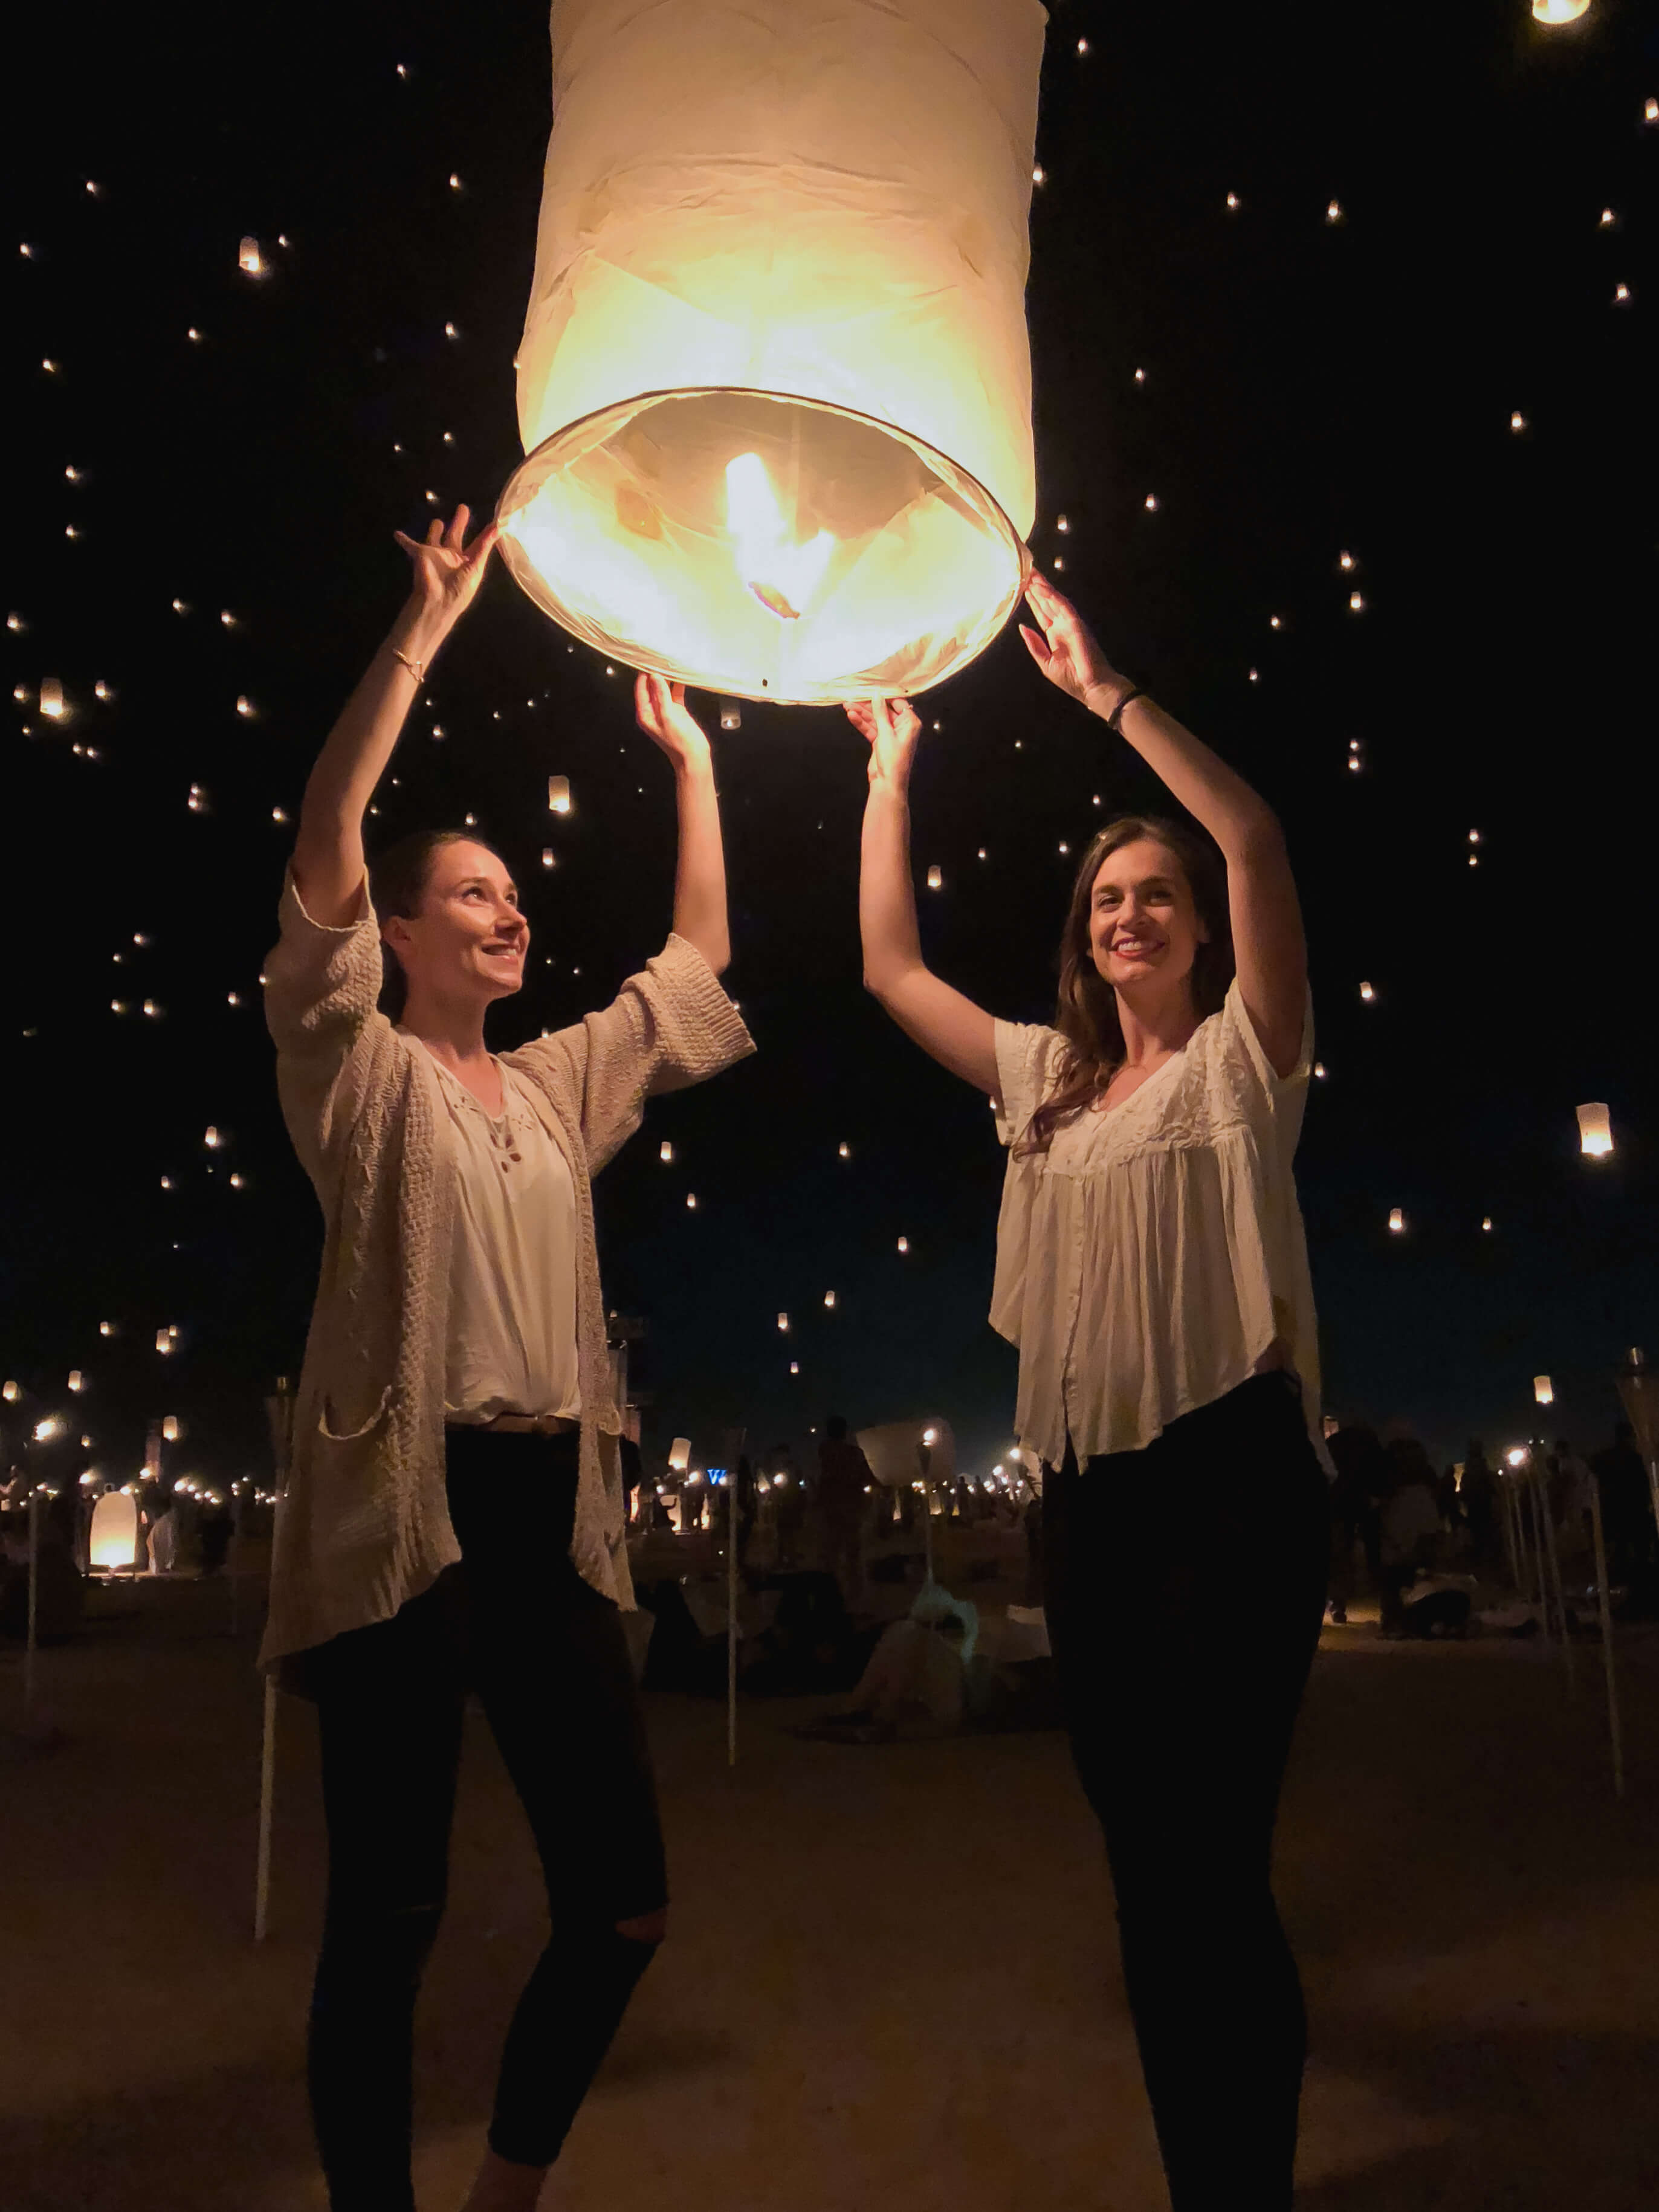 9 Things To Know About The Lights Fest Before You Go | Lantern fest, Sky  lanterns, Lantern festival usa